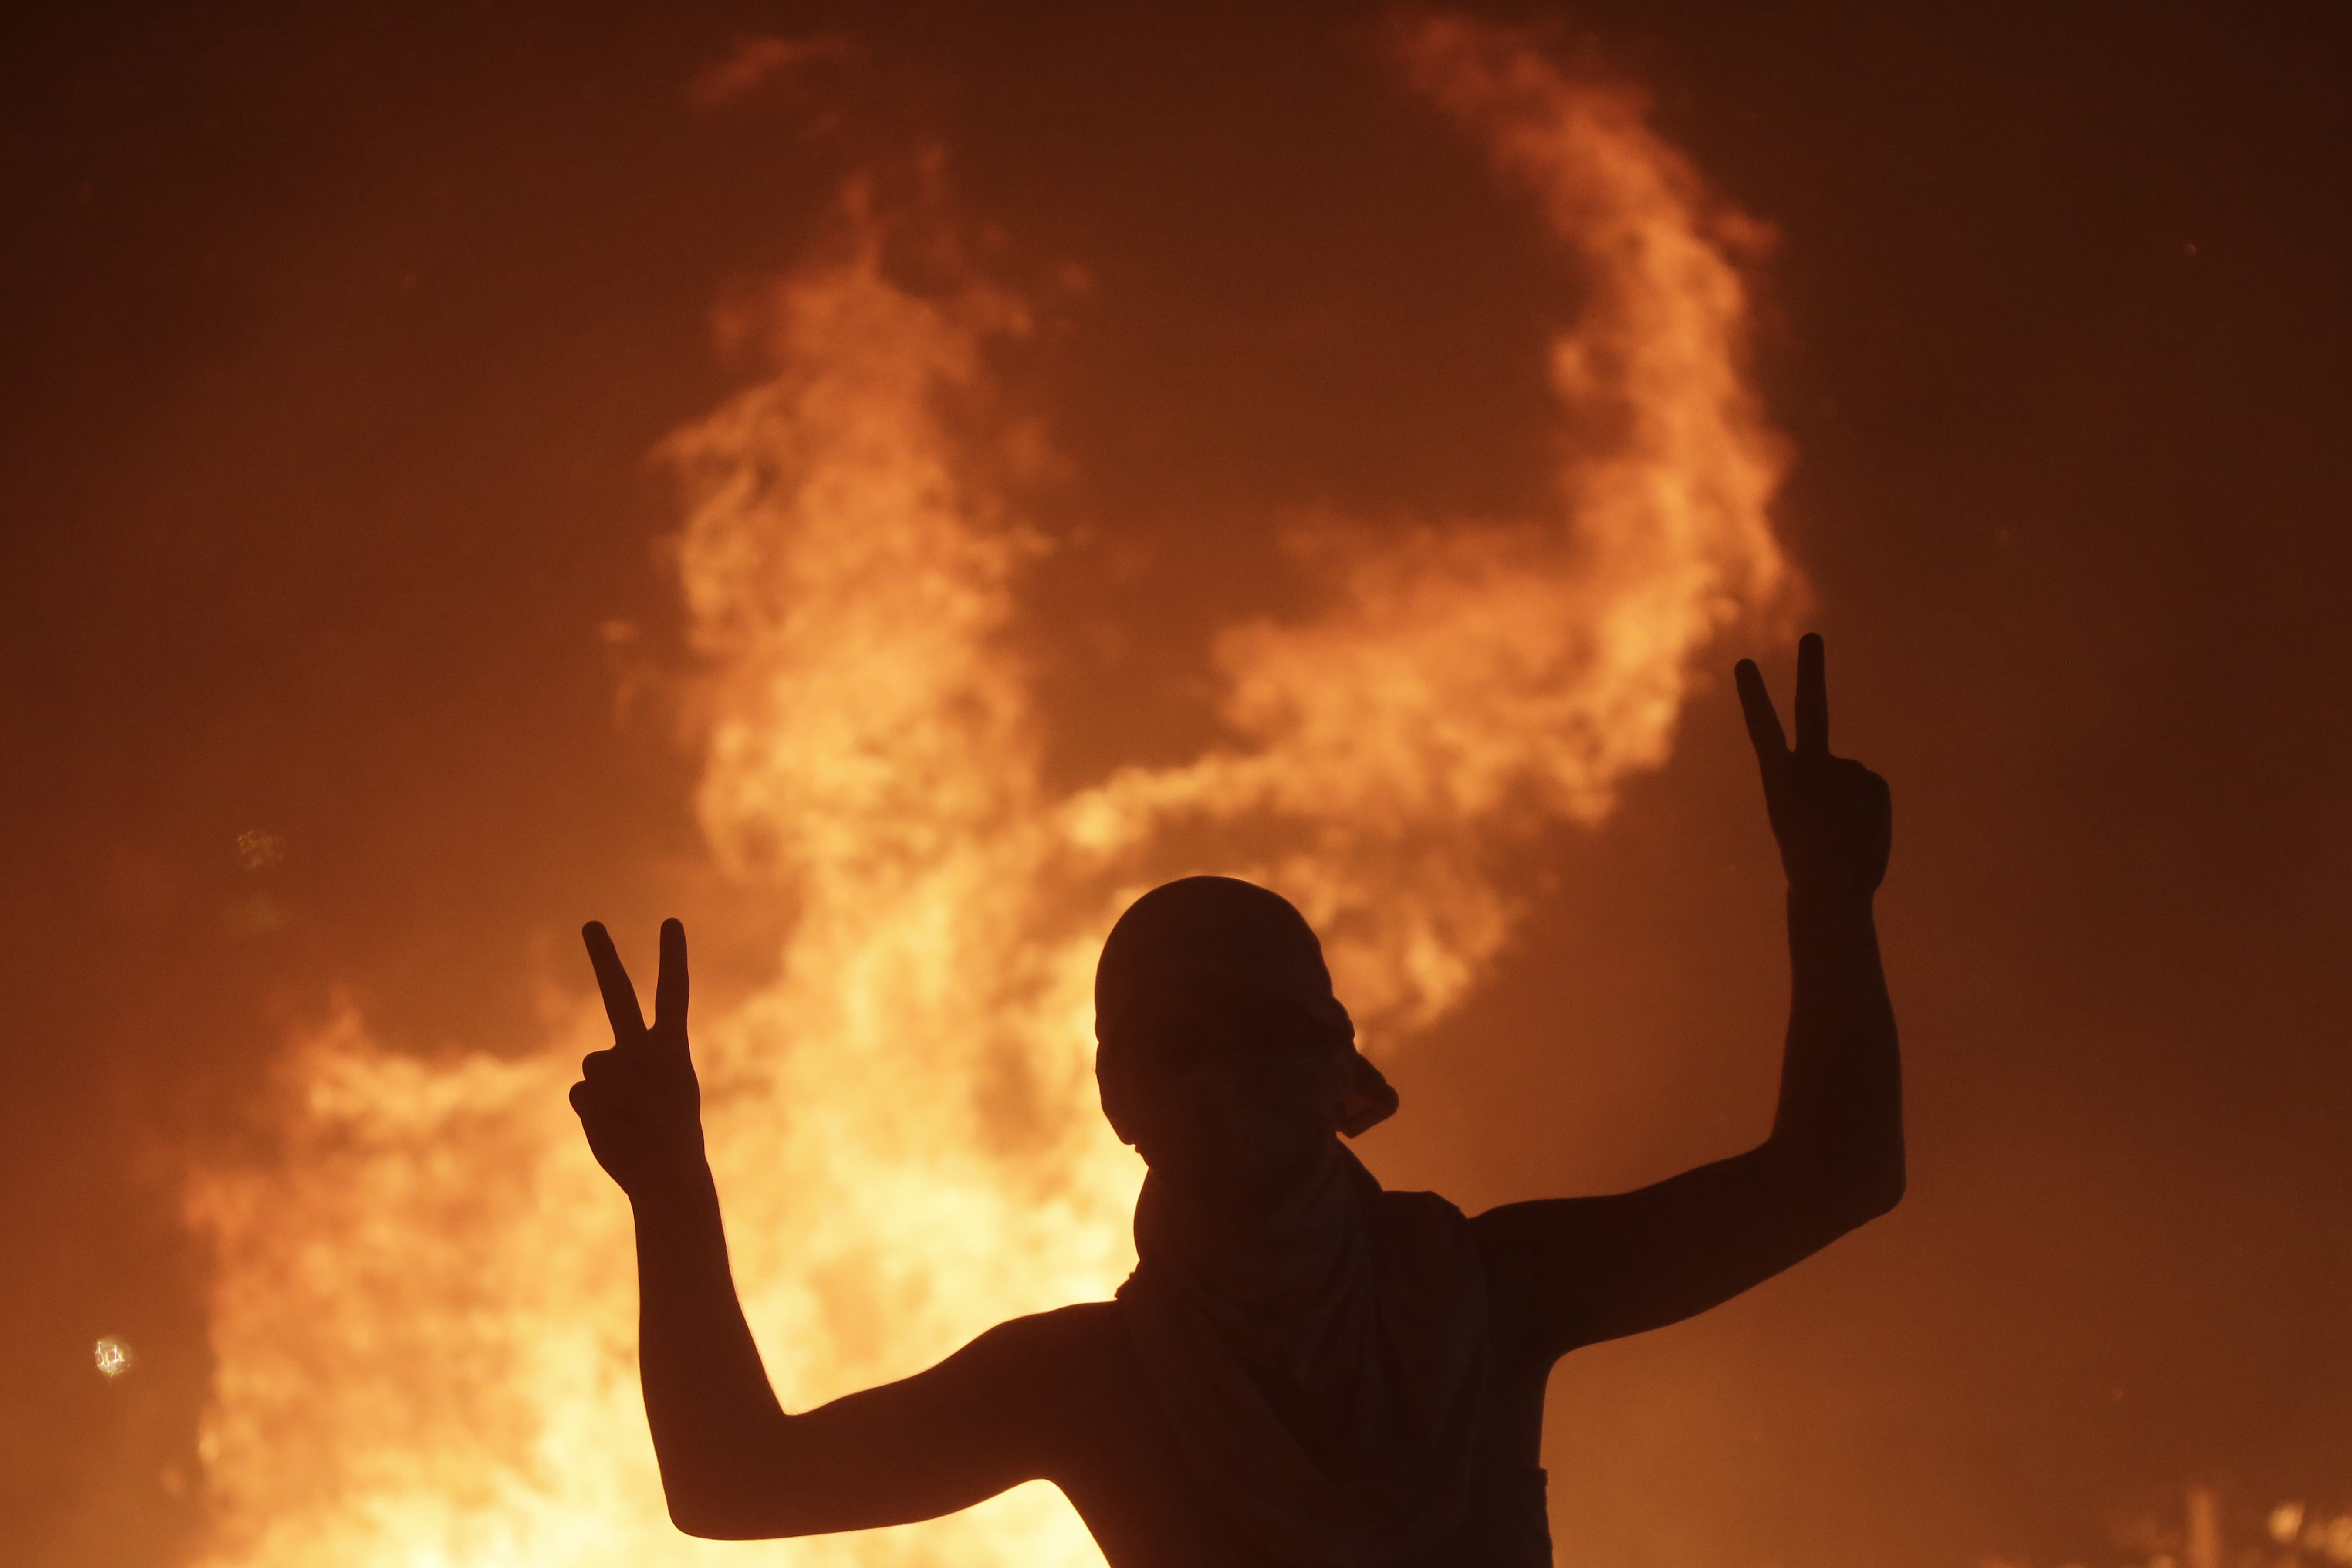 An anti-government protester makes victory signs in front a fire set to block a road during a demonstration in Beirut, Lebanon, Thursday, Oct. 17, 2019. Scores of people are protesting in Beirut and other parts of Lebanon over the government's plans to impose new taxes amid a harsh economic crisis in the country. (AP Photo/Hassan Ammar)